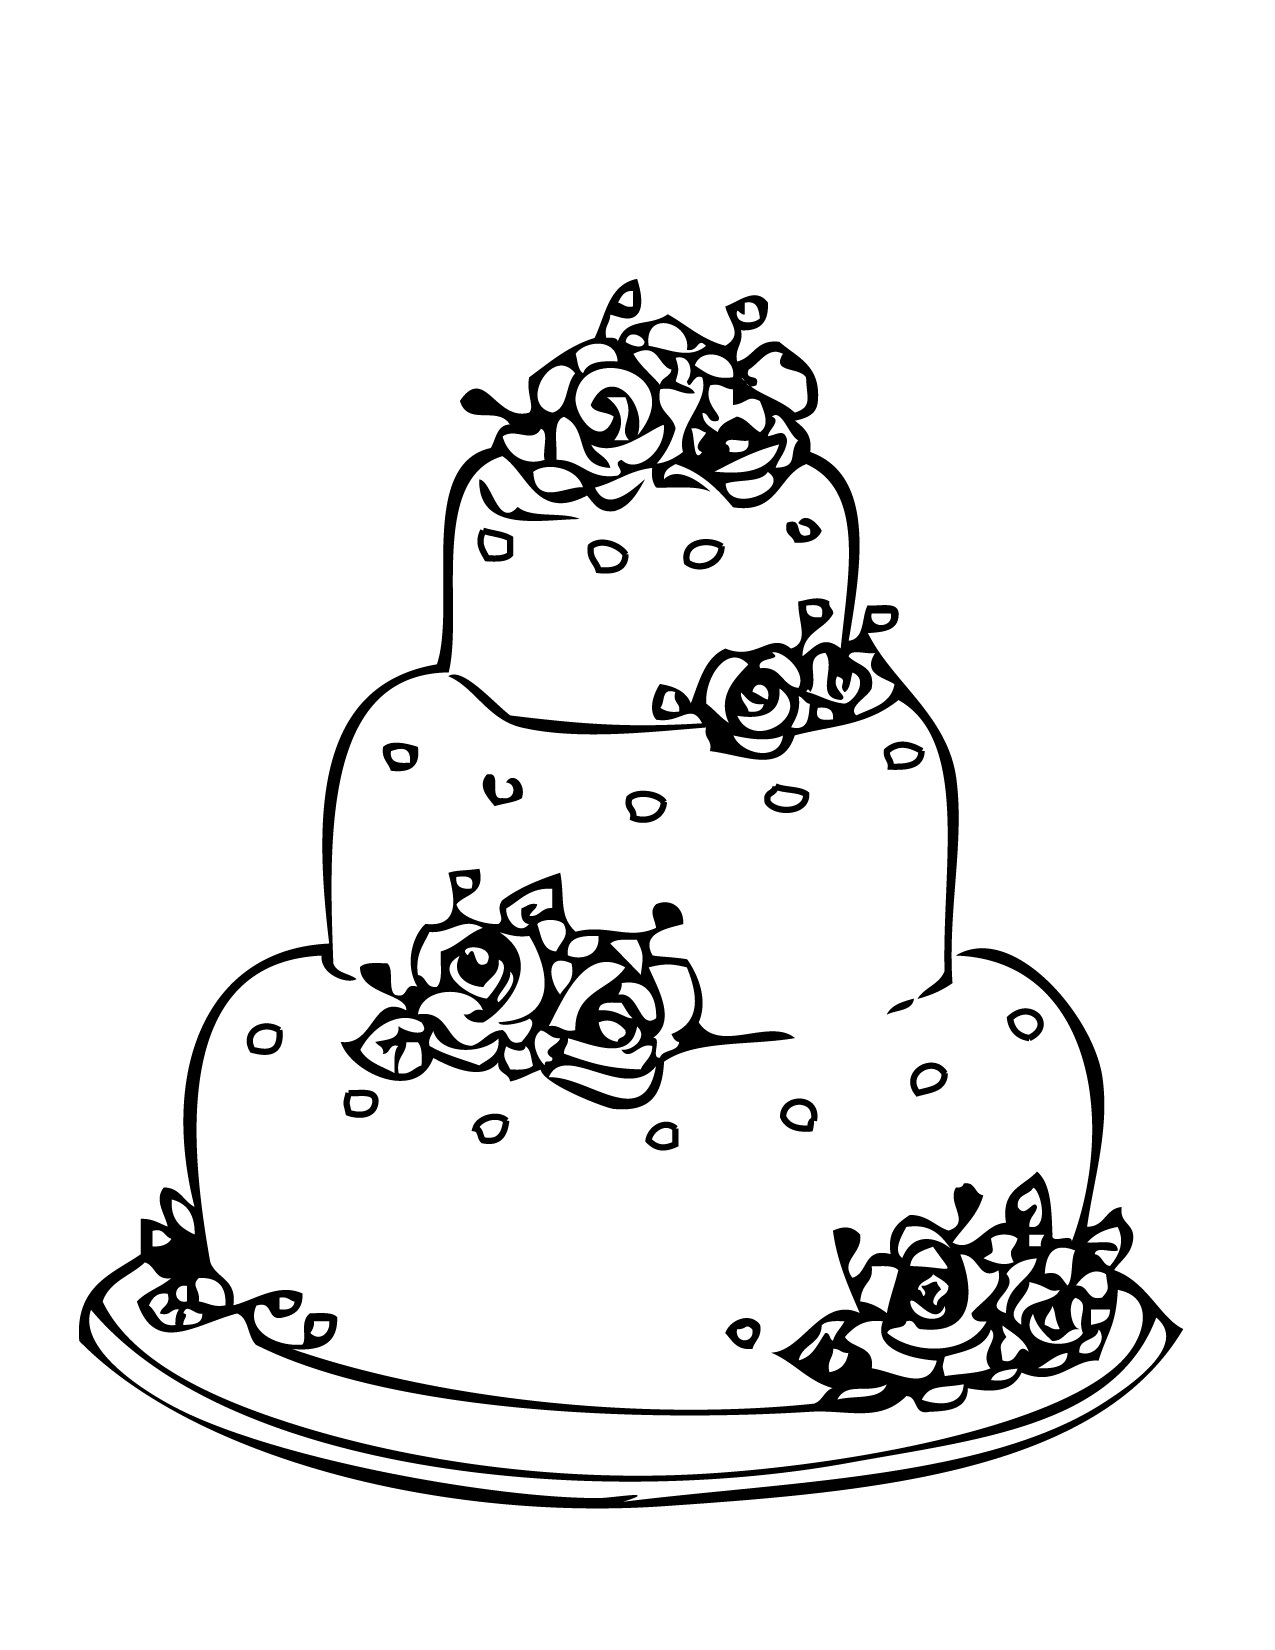 Wedding Activity Coloring Pages Wedding Coloring Pages Best Coloring Pages For Kids